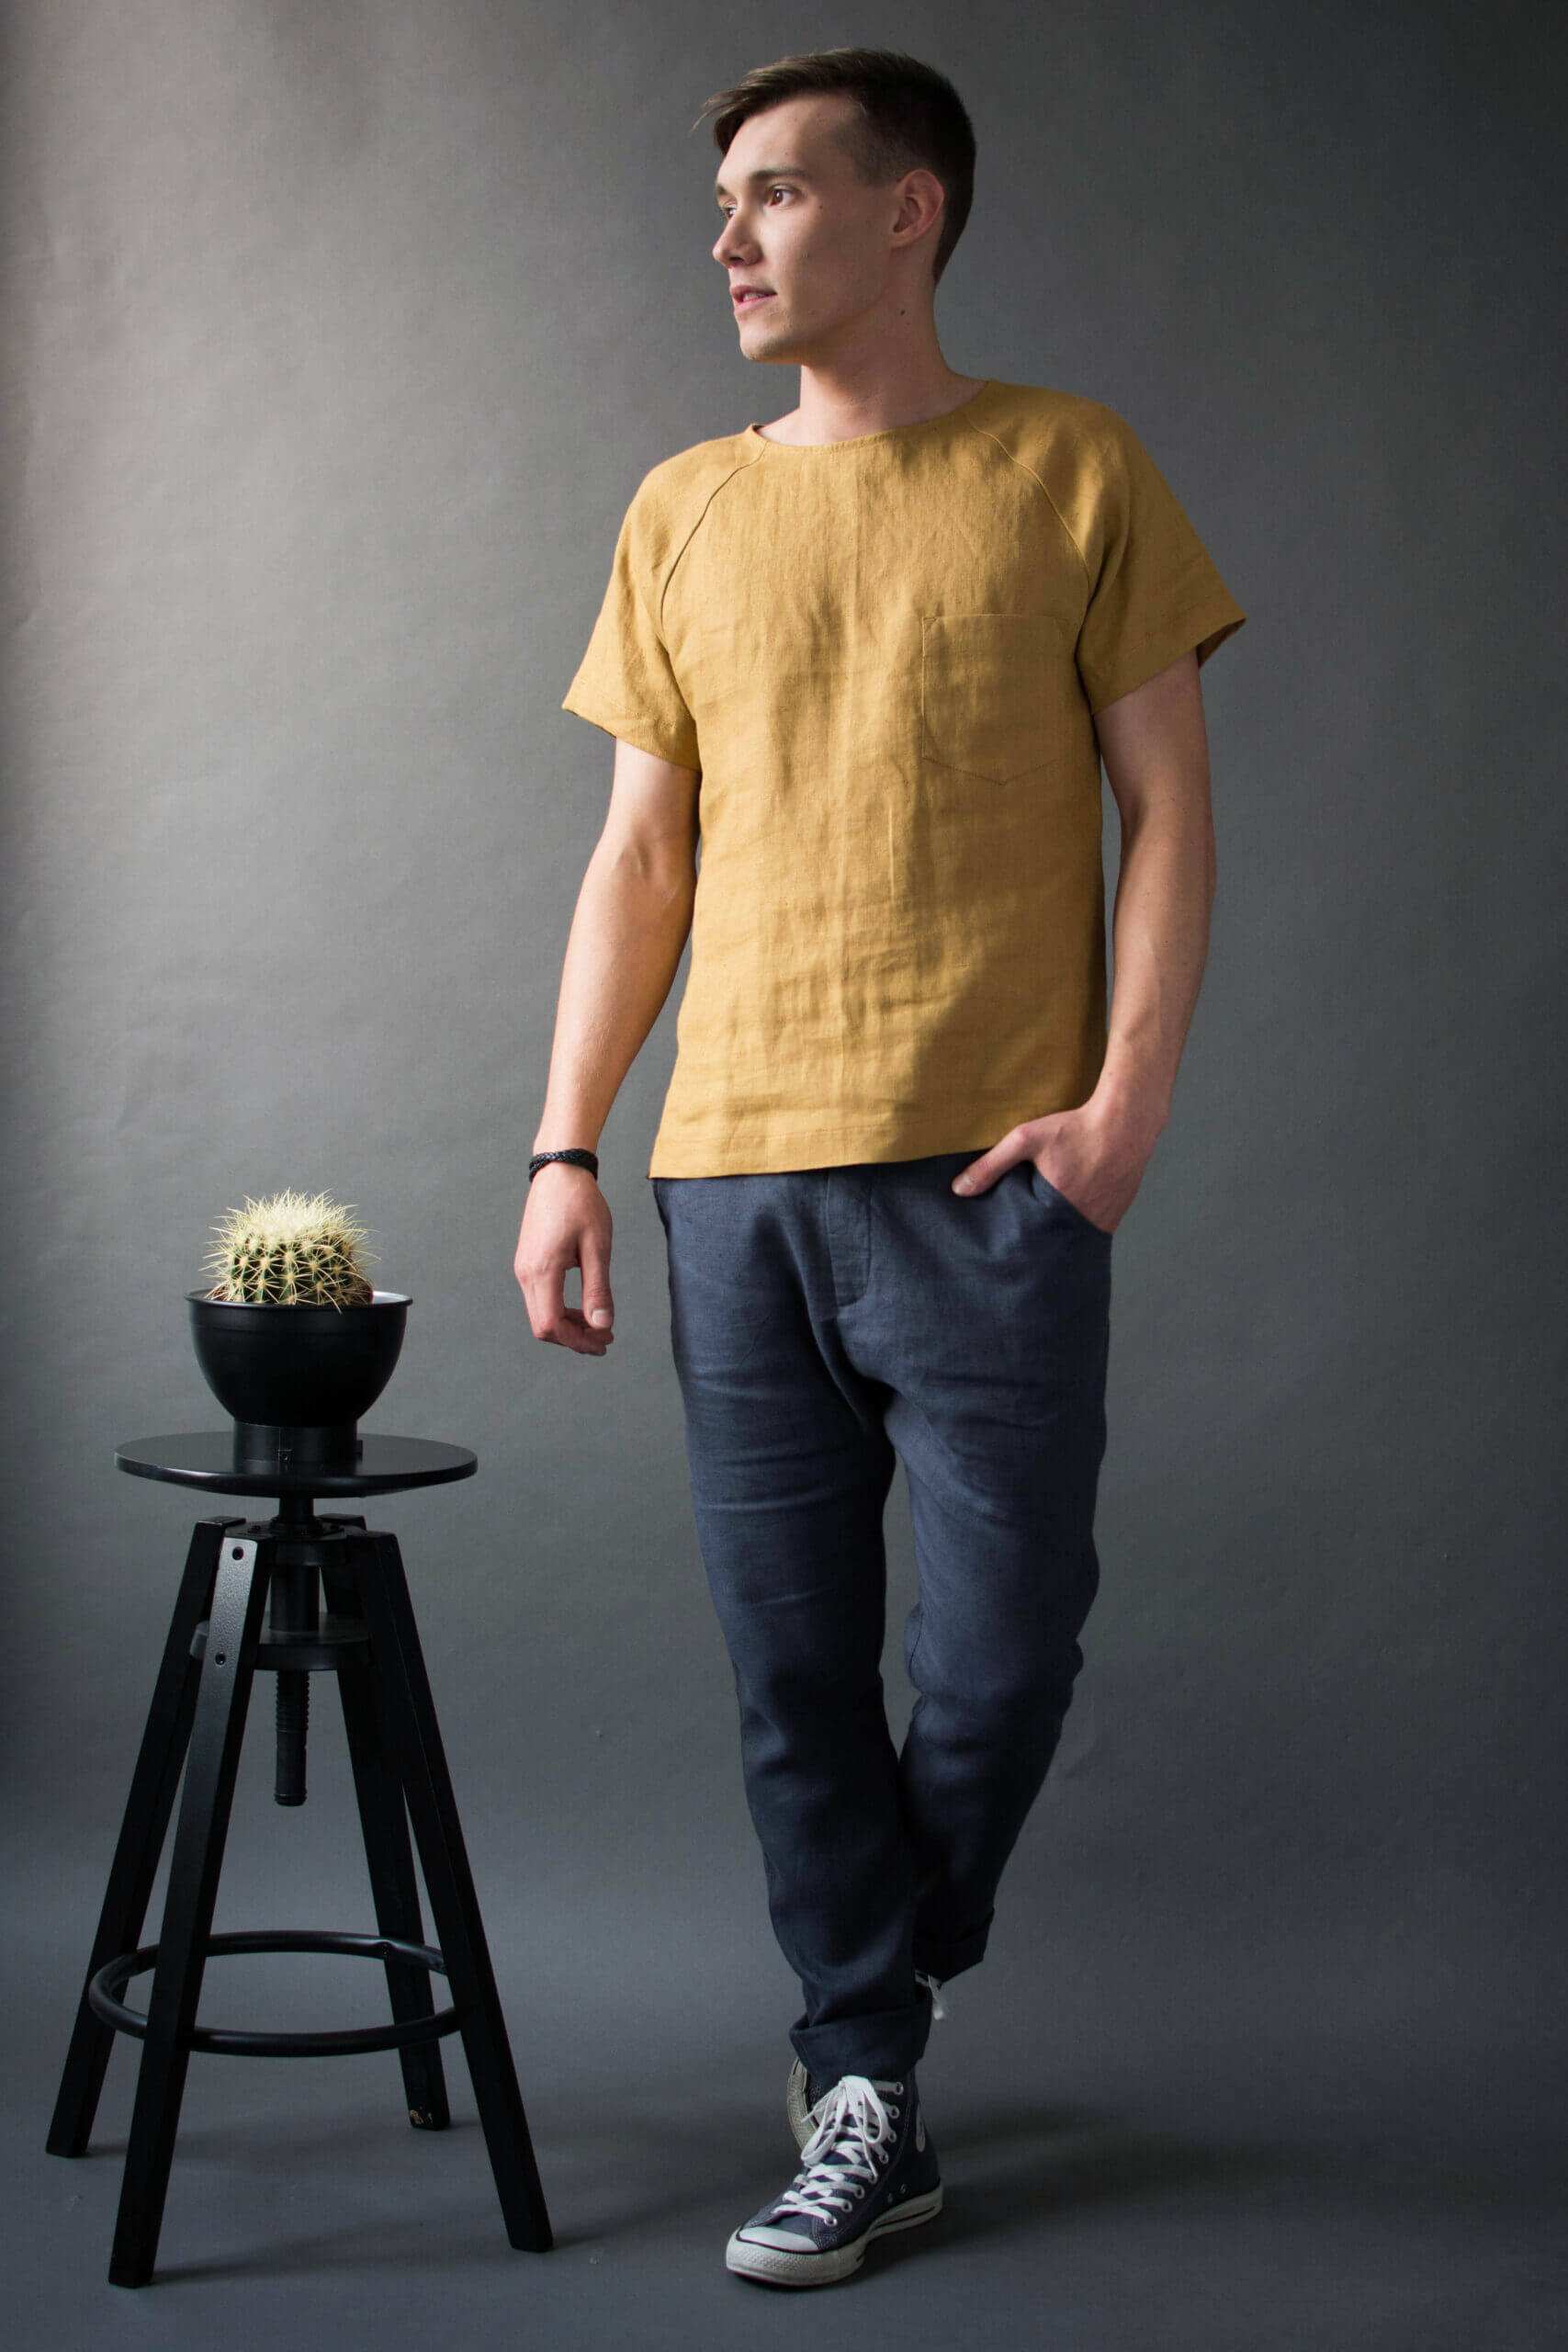 Mustard raglan t-shirt paired with graphite pants for a summer outfit